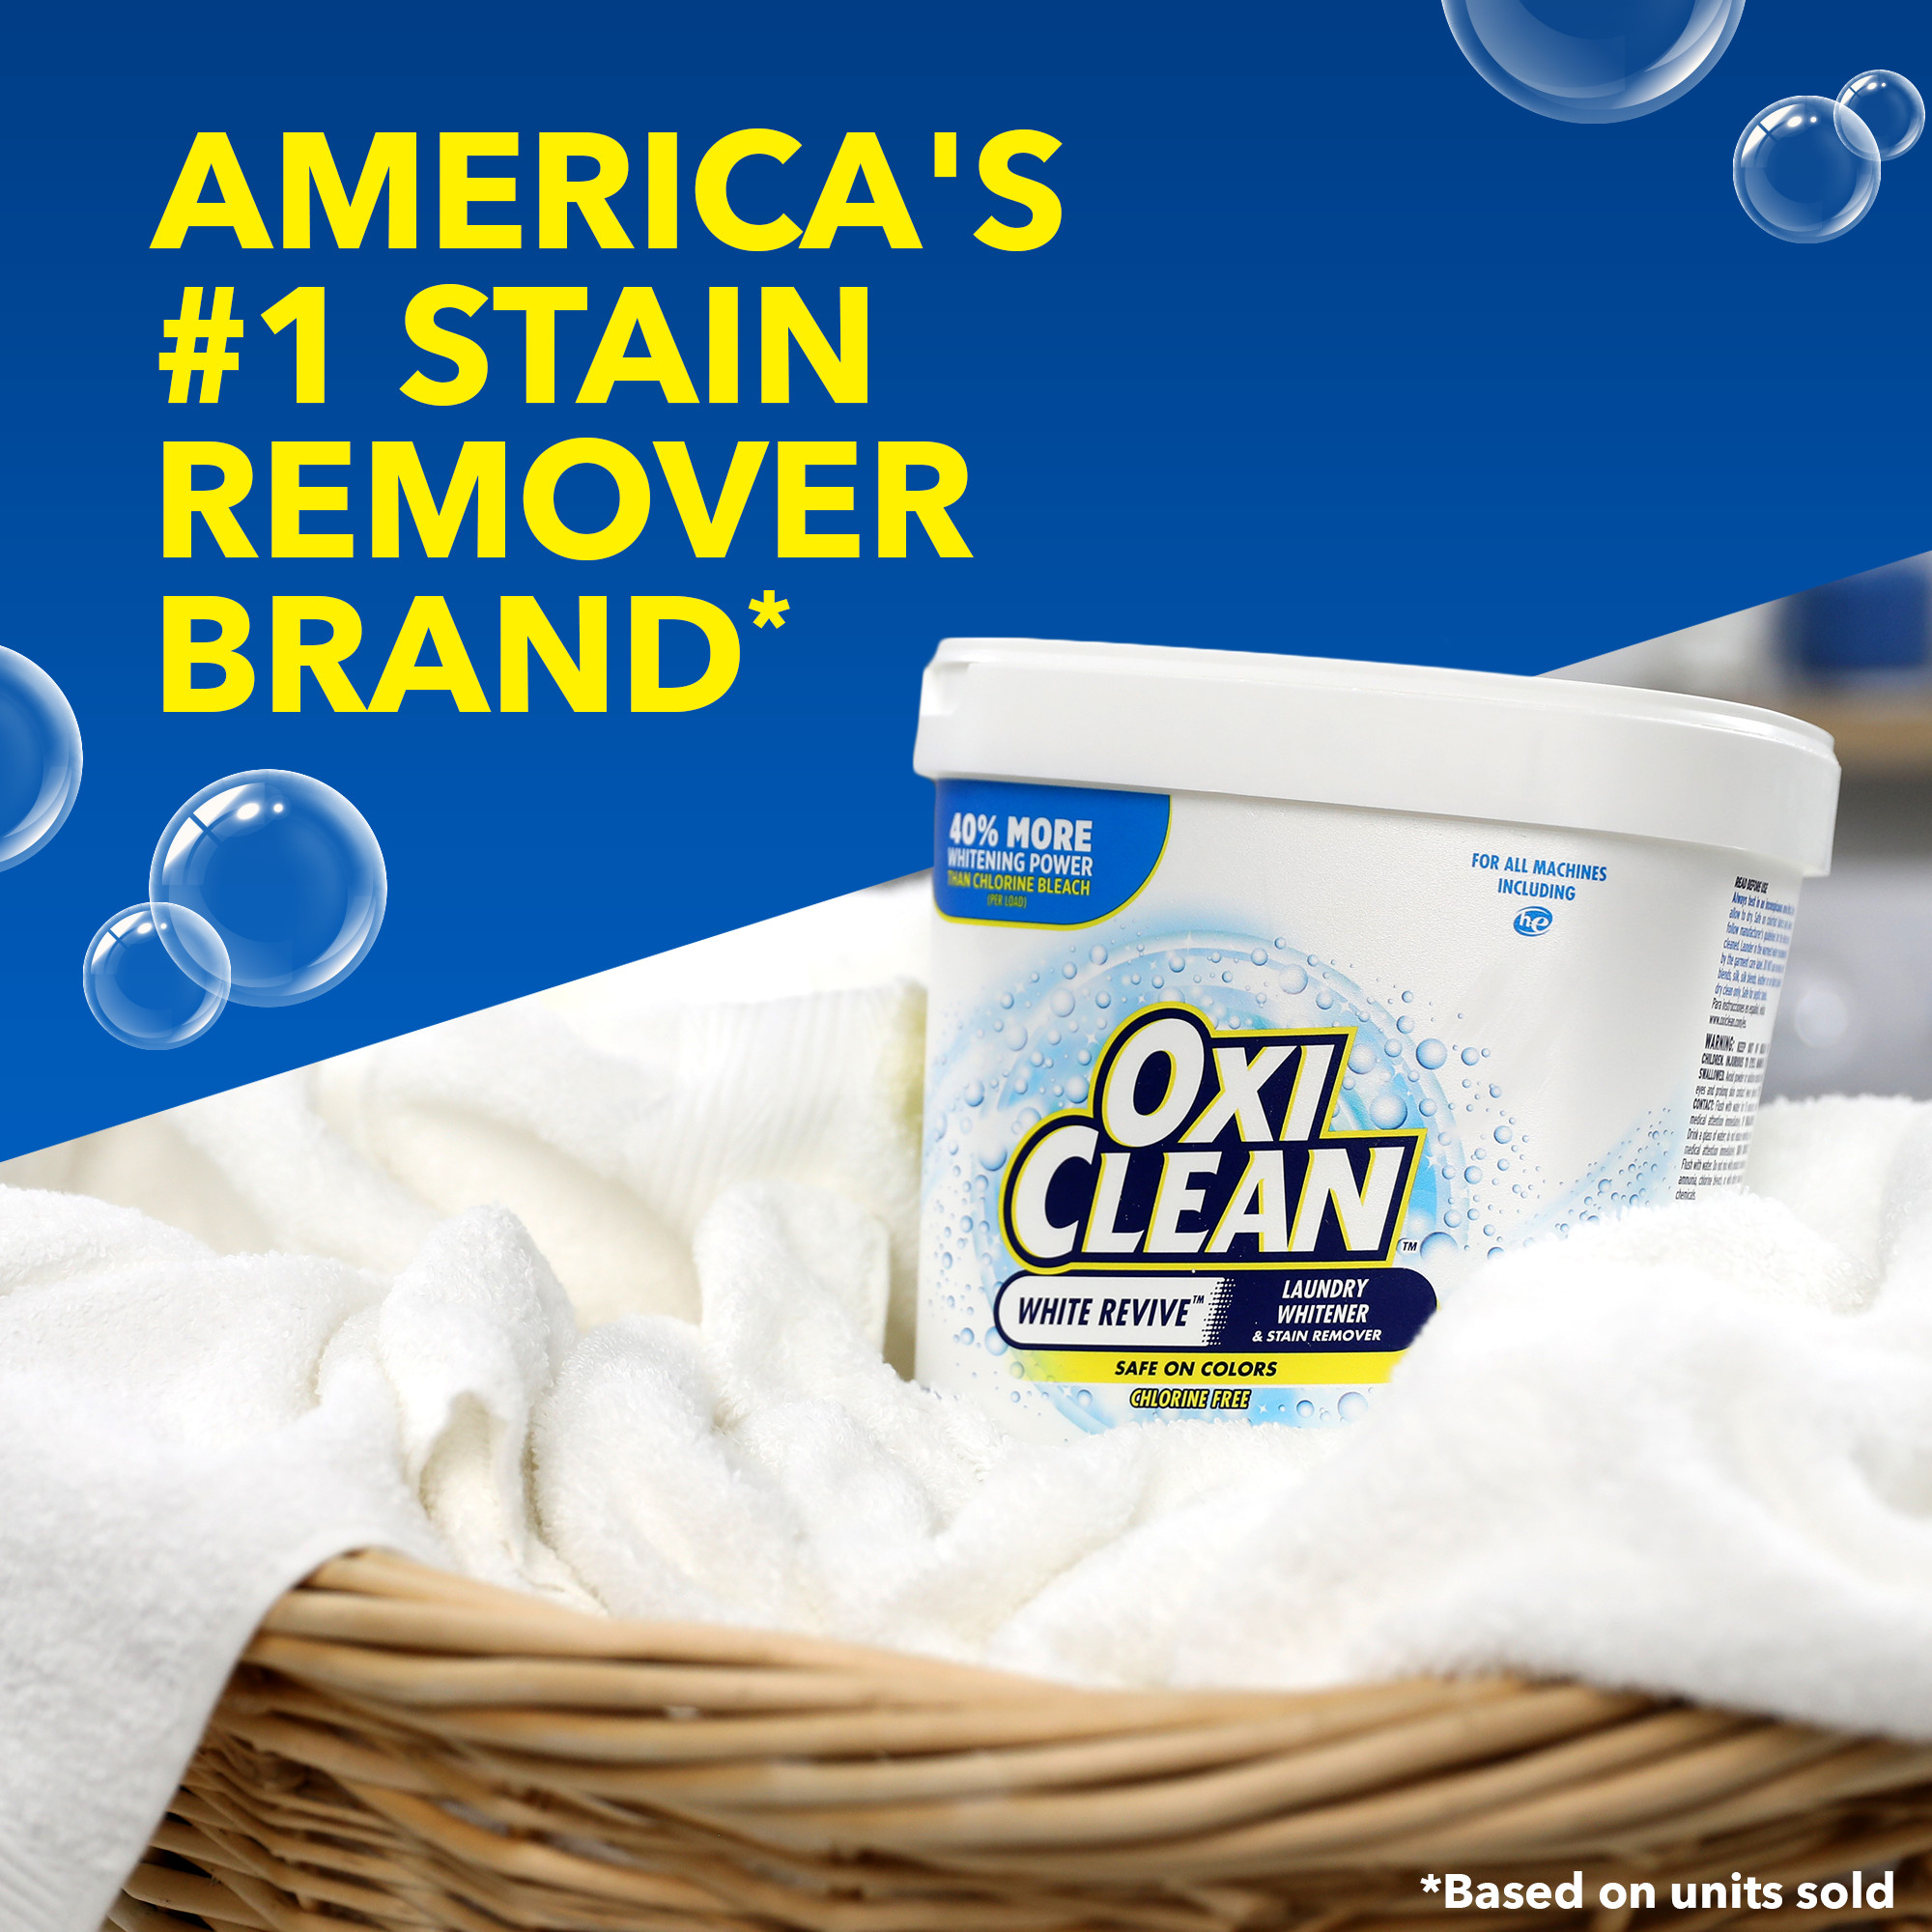 OxiClean White Revive Laundry Whitener and Stain Remover Powder, 5 lb - image 9 of 9